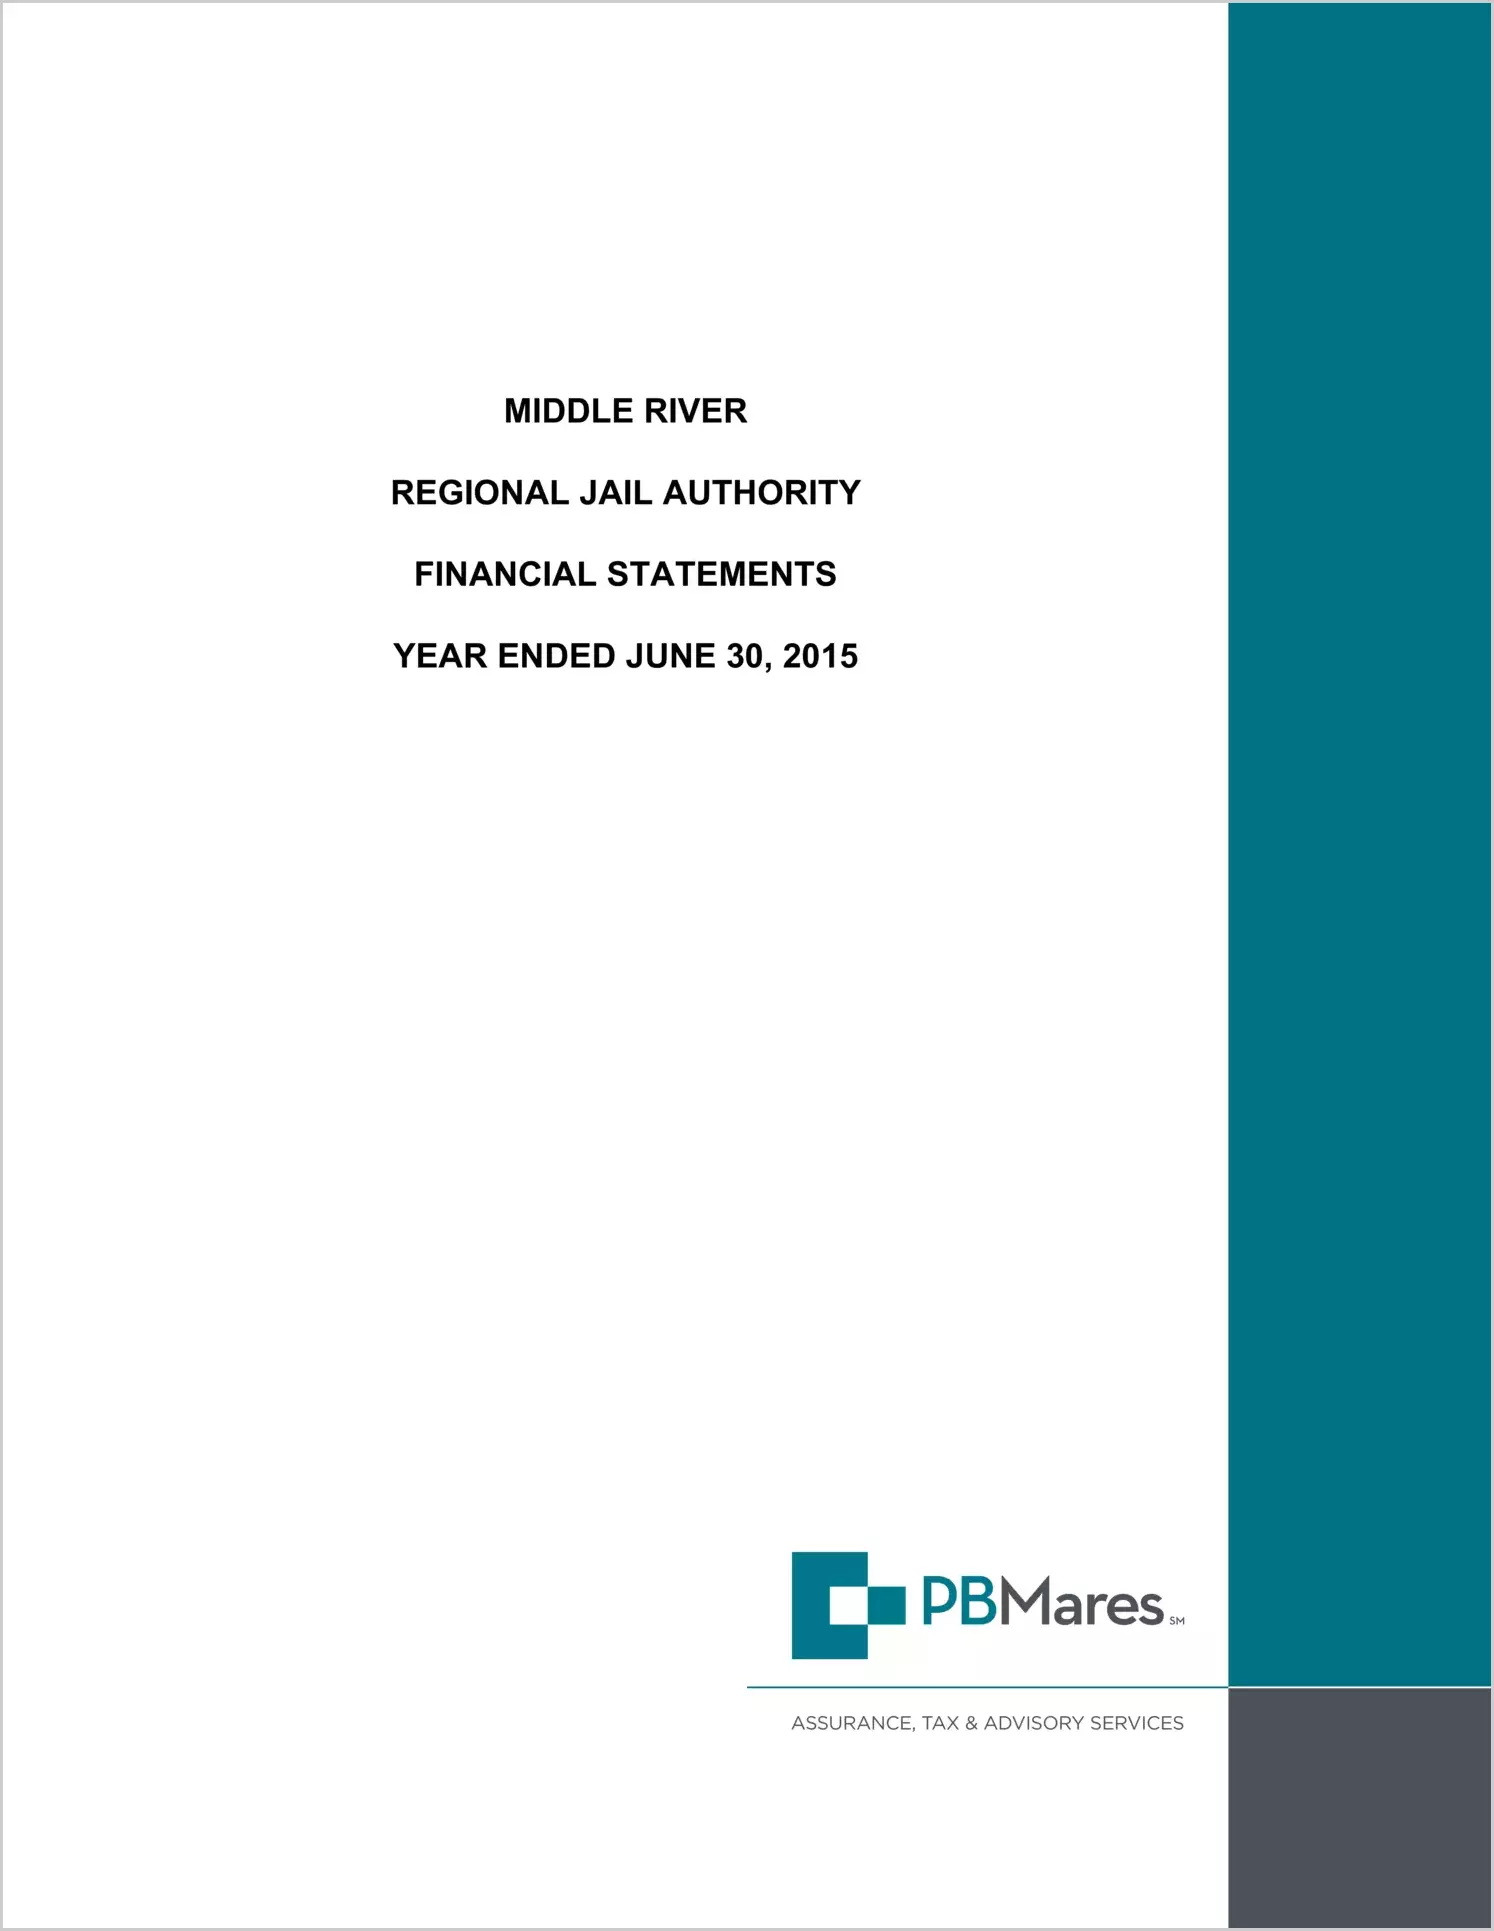 2015 ABC/Other Annual Financial Report  for Middle River Regional Jail Authority